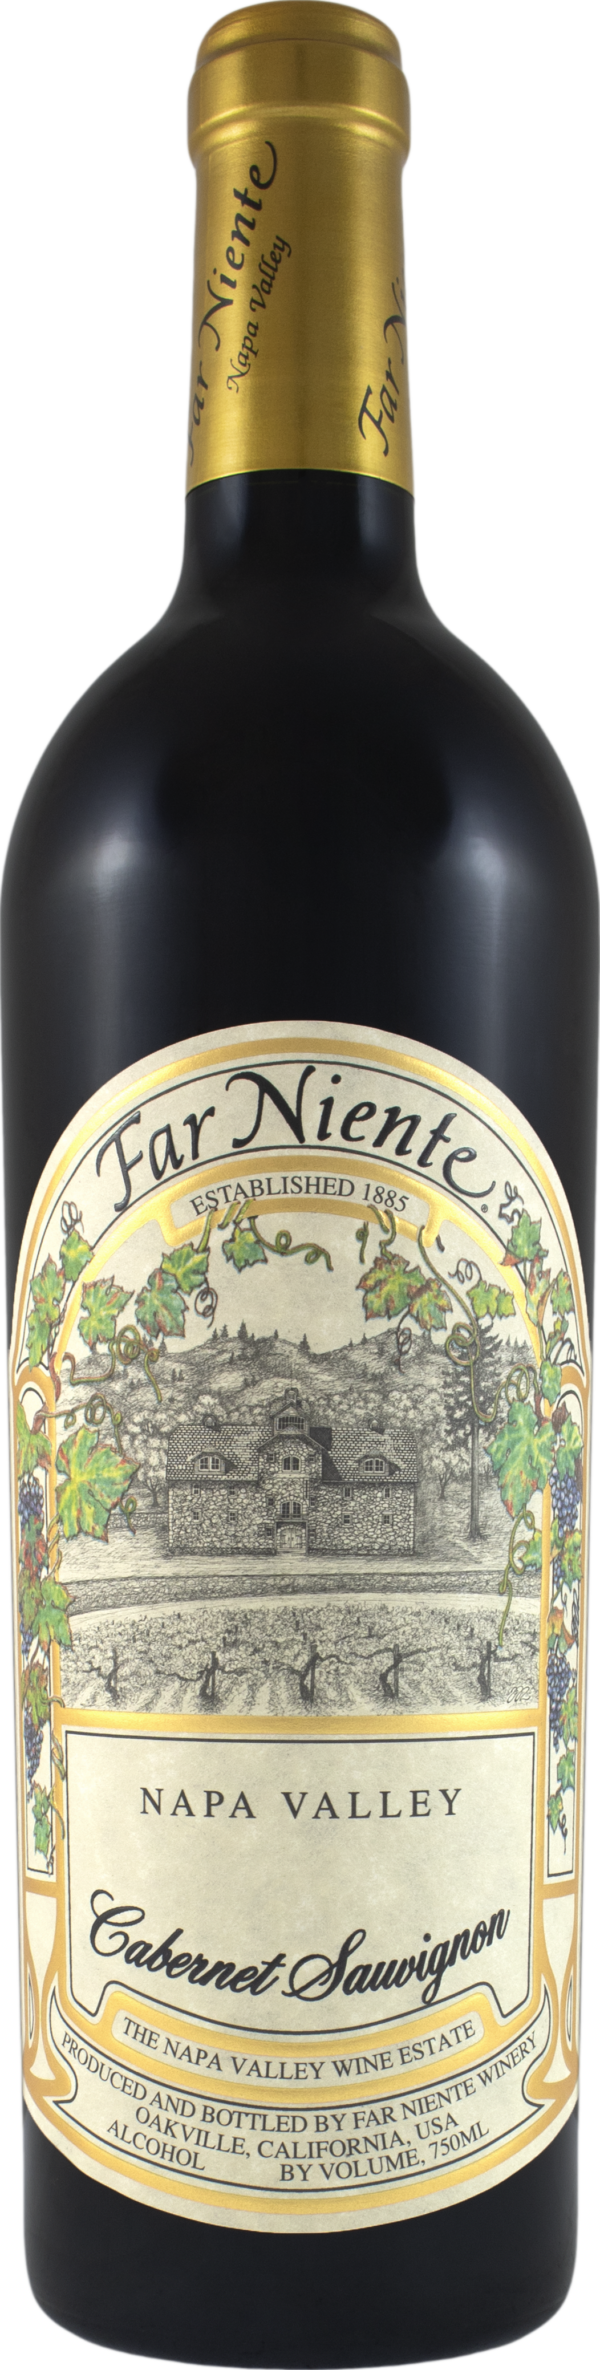 Product image of Far Niente Cabernet Sauvignon 2019 from 8wines